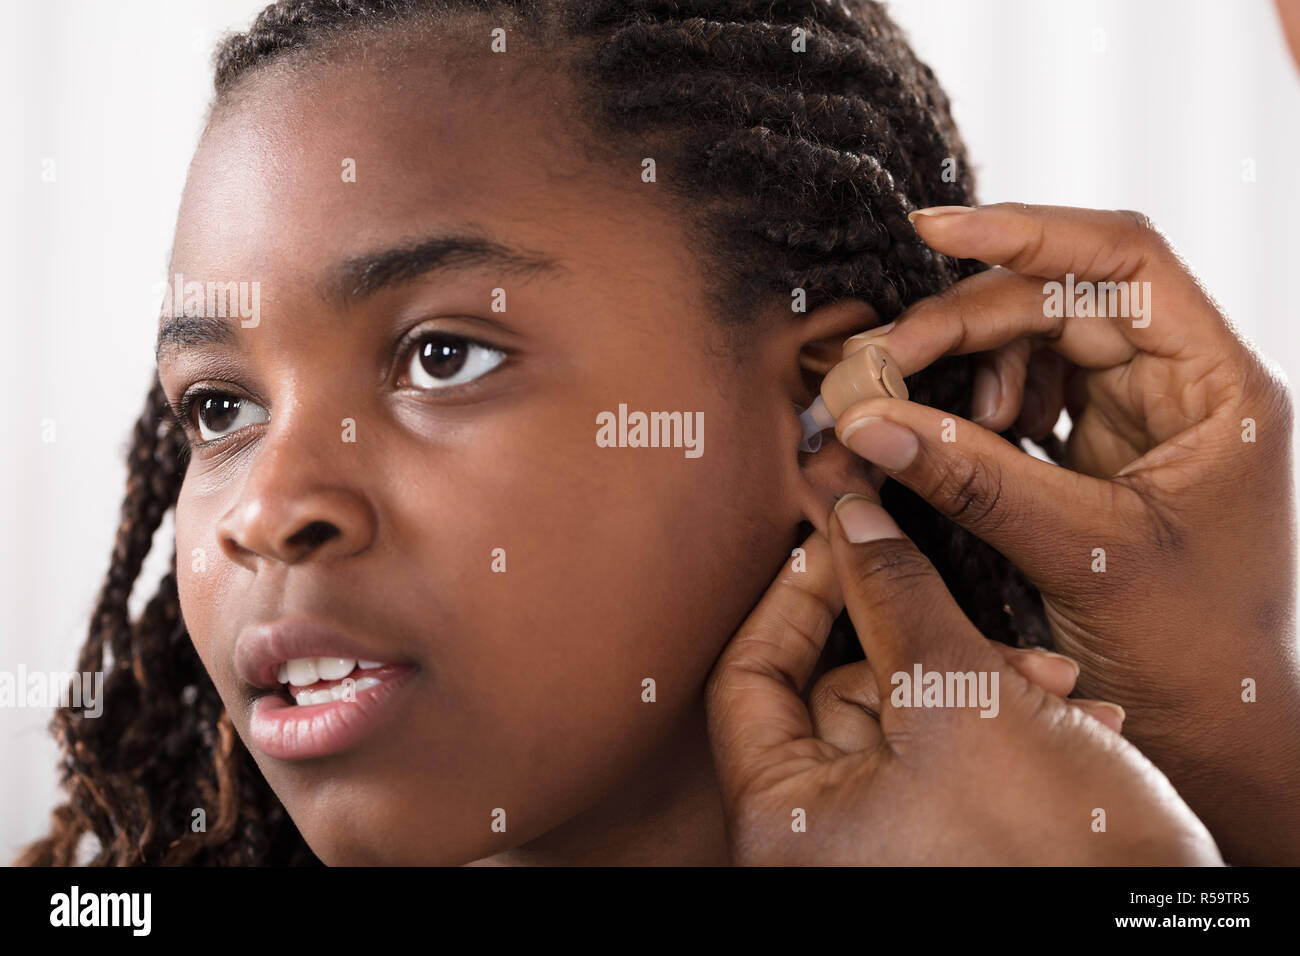 Doctor Putting Hearing Aid In Patient's Ear Stock Photo